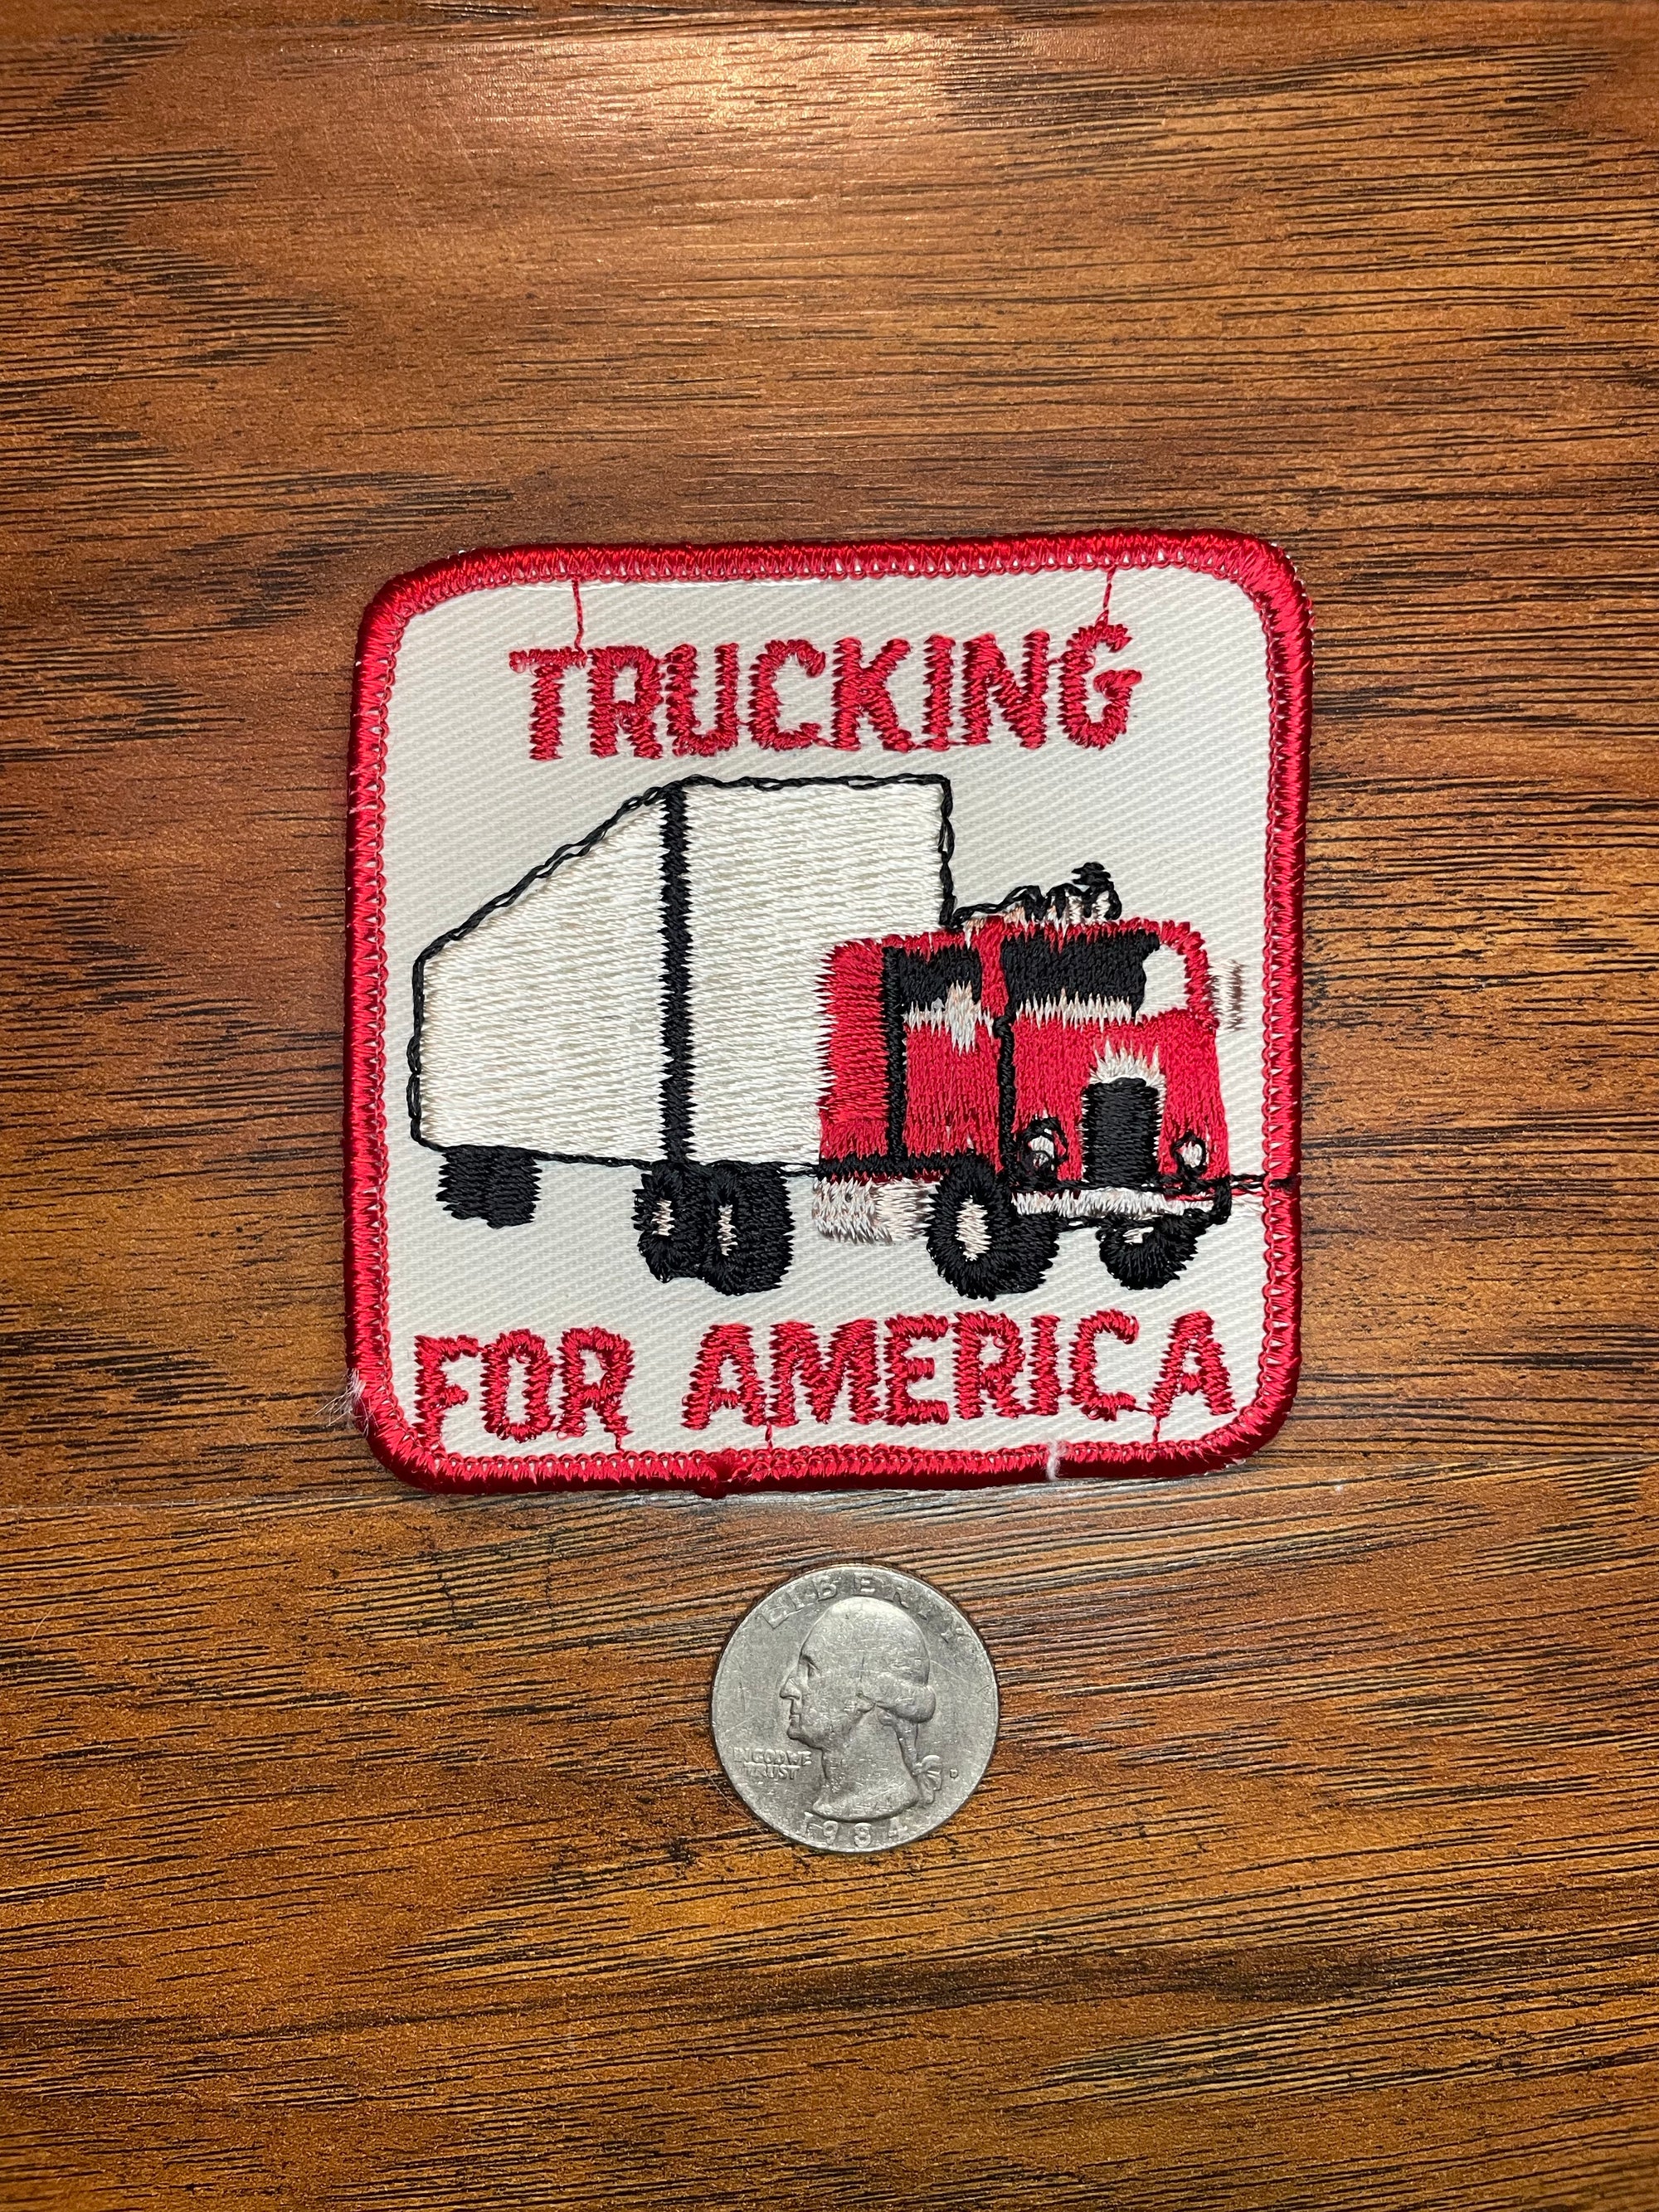 Vintage Trucking For America